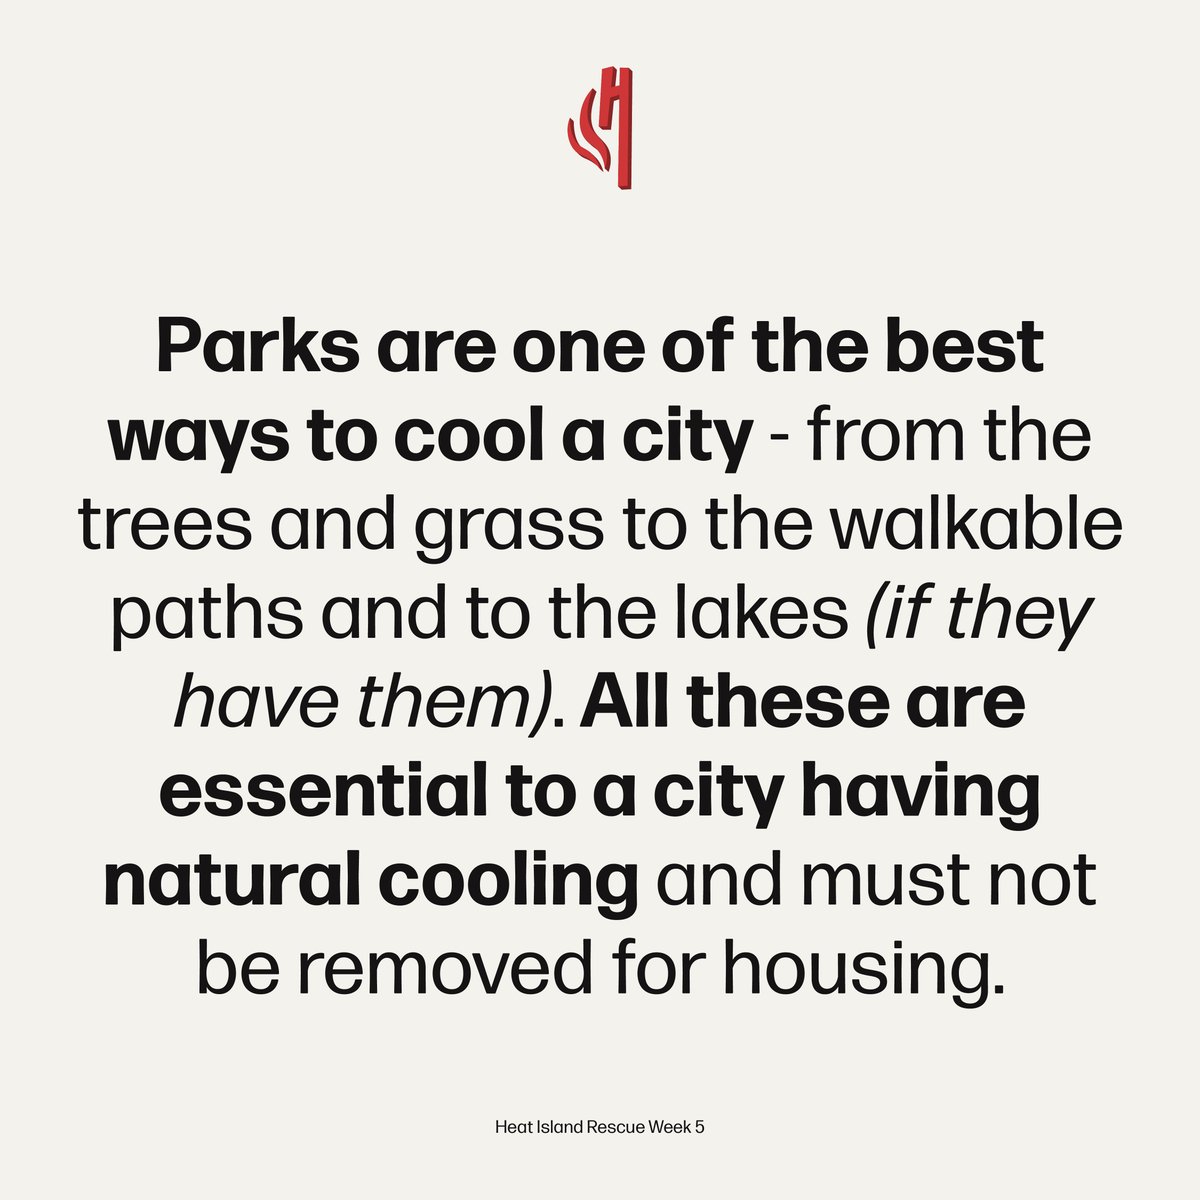 MORE PARKS = LESS HEAT 🔥🌳

We must preserve the parks in our cities and ensure that in any new developments, at least 1/3 of the land is dedicated to green spaces!

Even in your own house - have green front yards and backyards!

#Parks #GreenSpaces #UrbanDesign